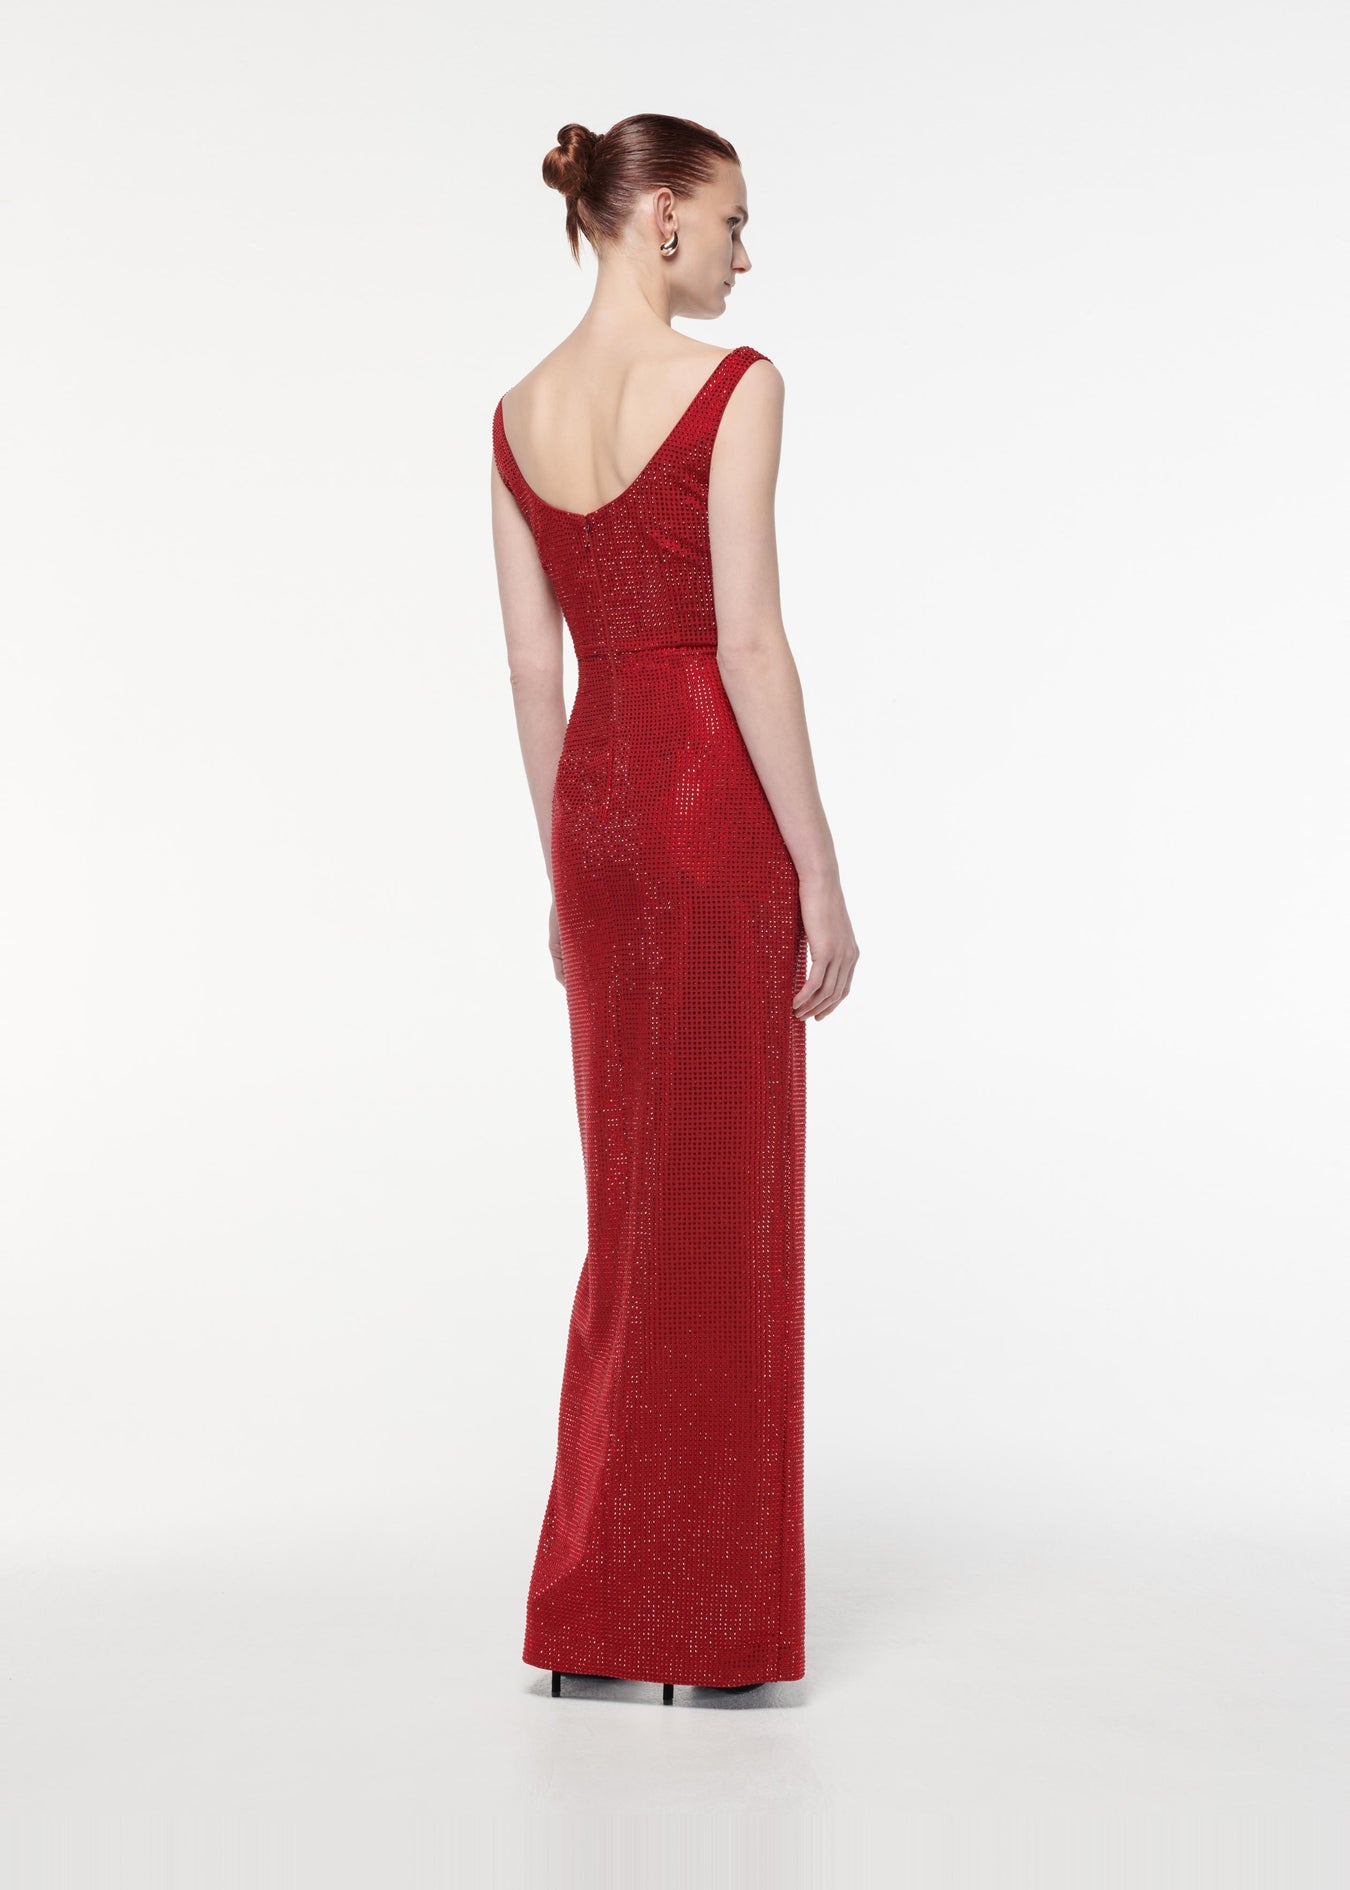 A photograph of a woman wearing a Diamante Gown in Red